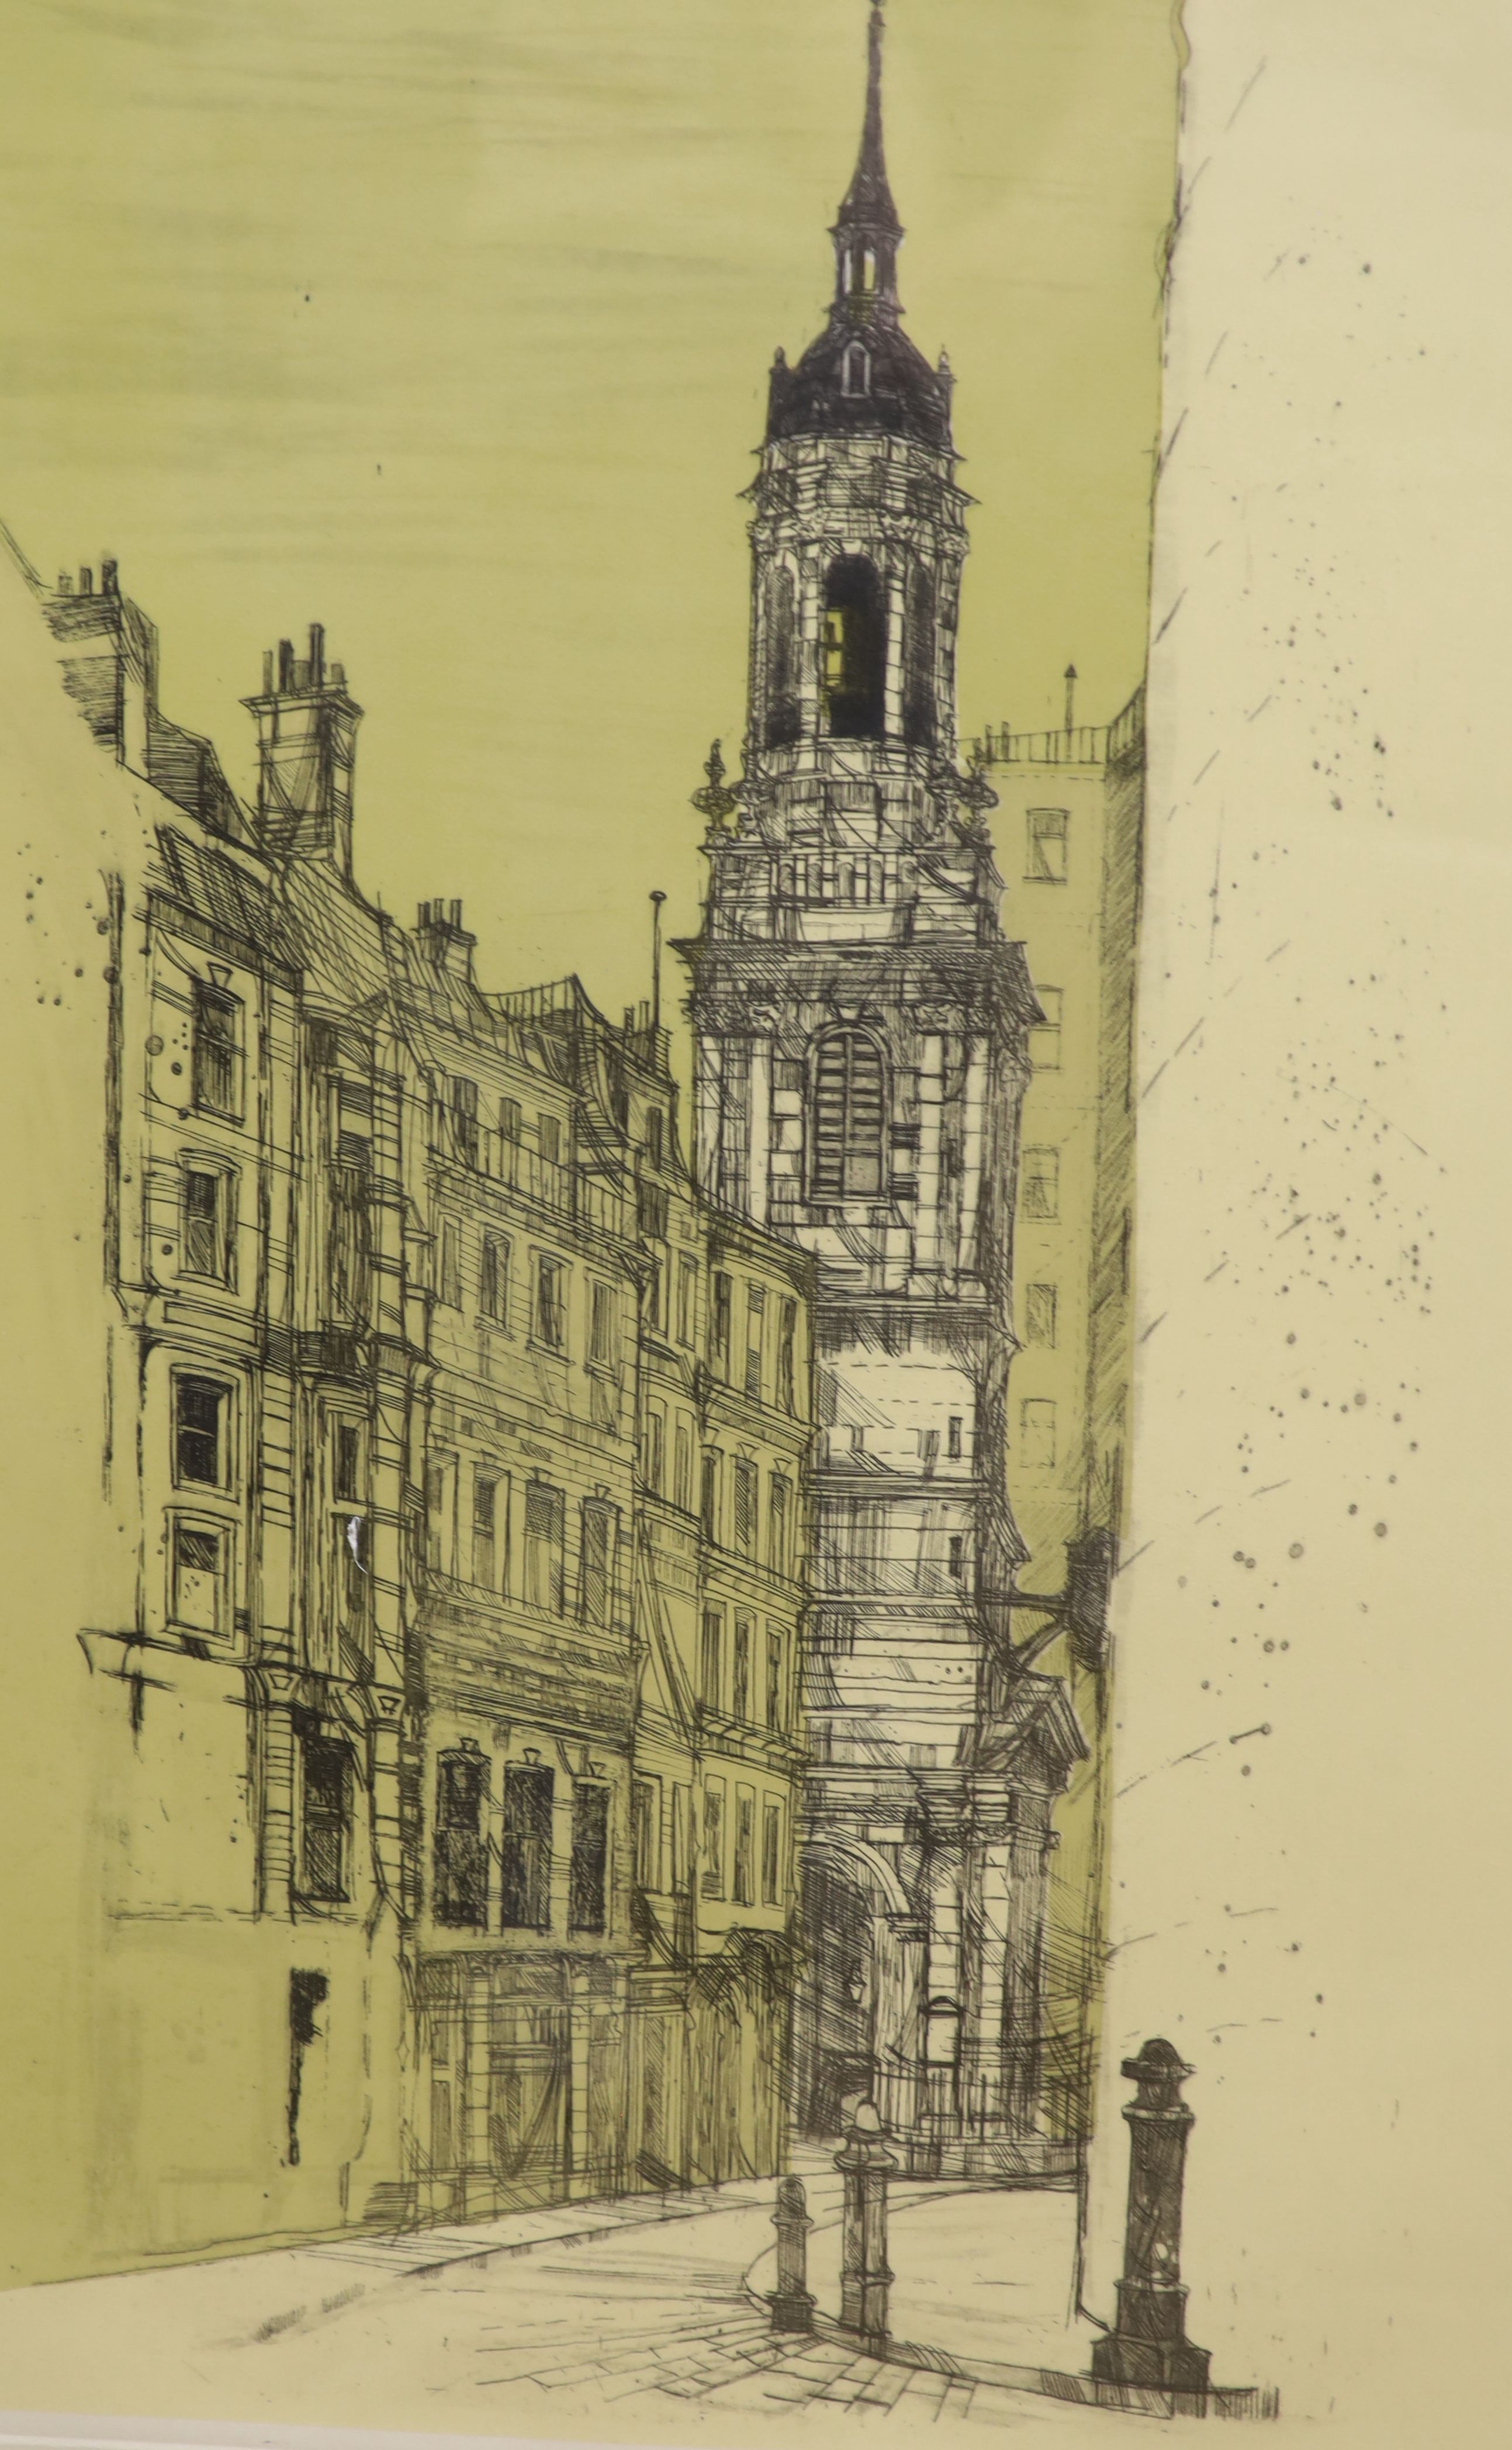 Richard Beer (1928-2017), two coloured etchings, Christ Church, Newgate, signed, 32/75, 65 x 45cm and Magnus The Martyr, 32/75, 65 x 45